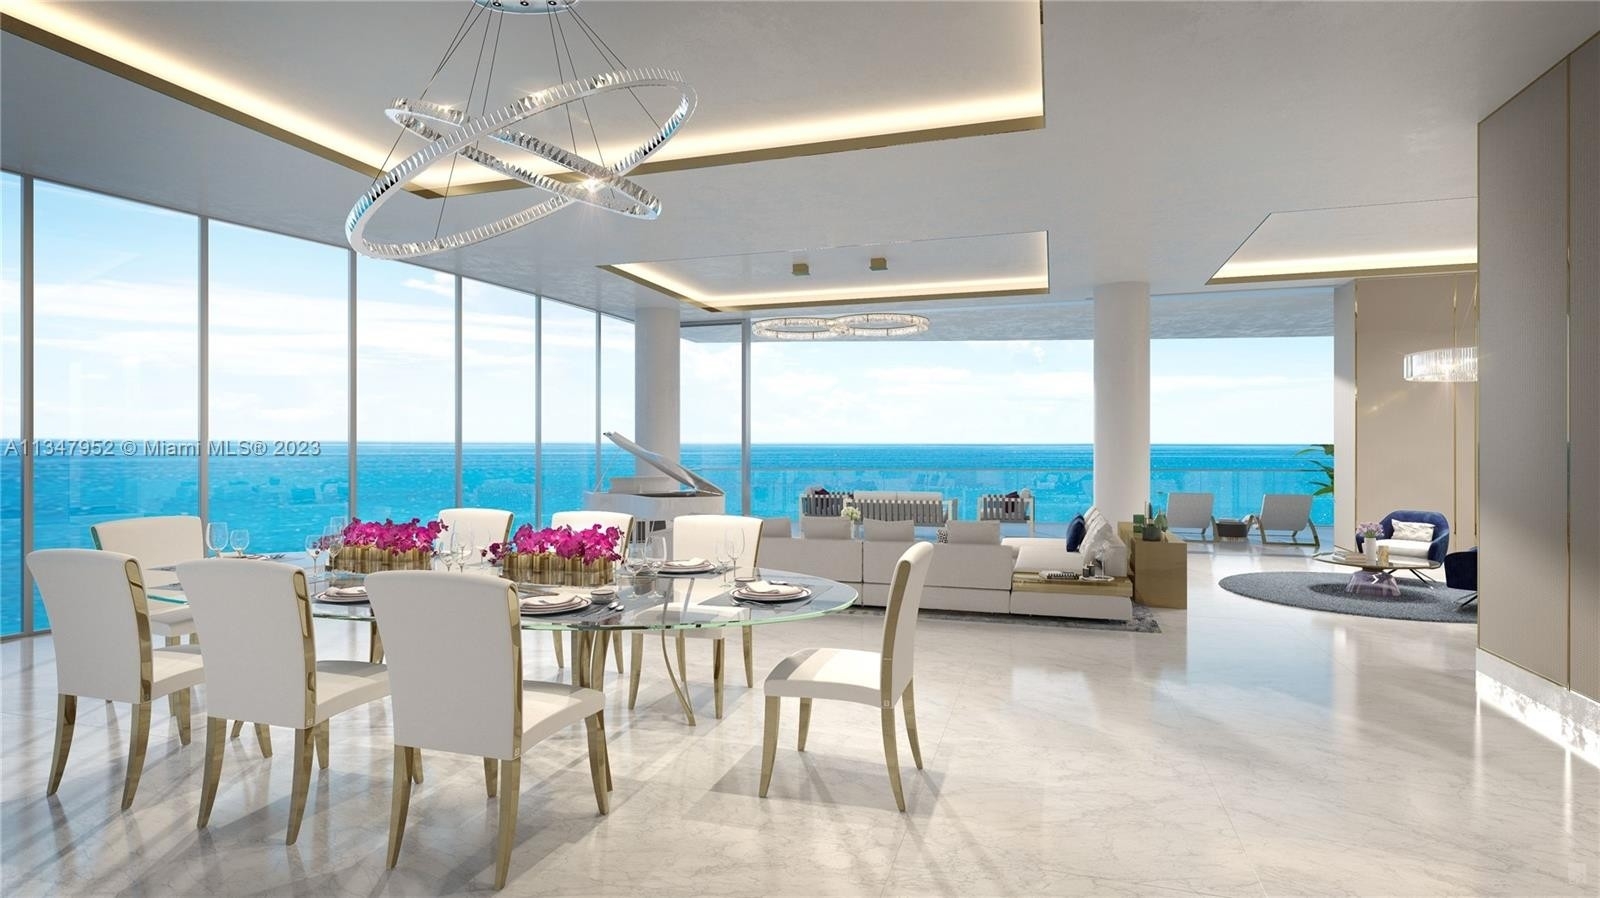 Condominium for Sale at Address Not Available North Biscayne Beach, Sunny Isles Beach, FL 33160